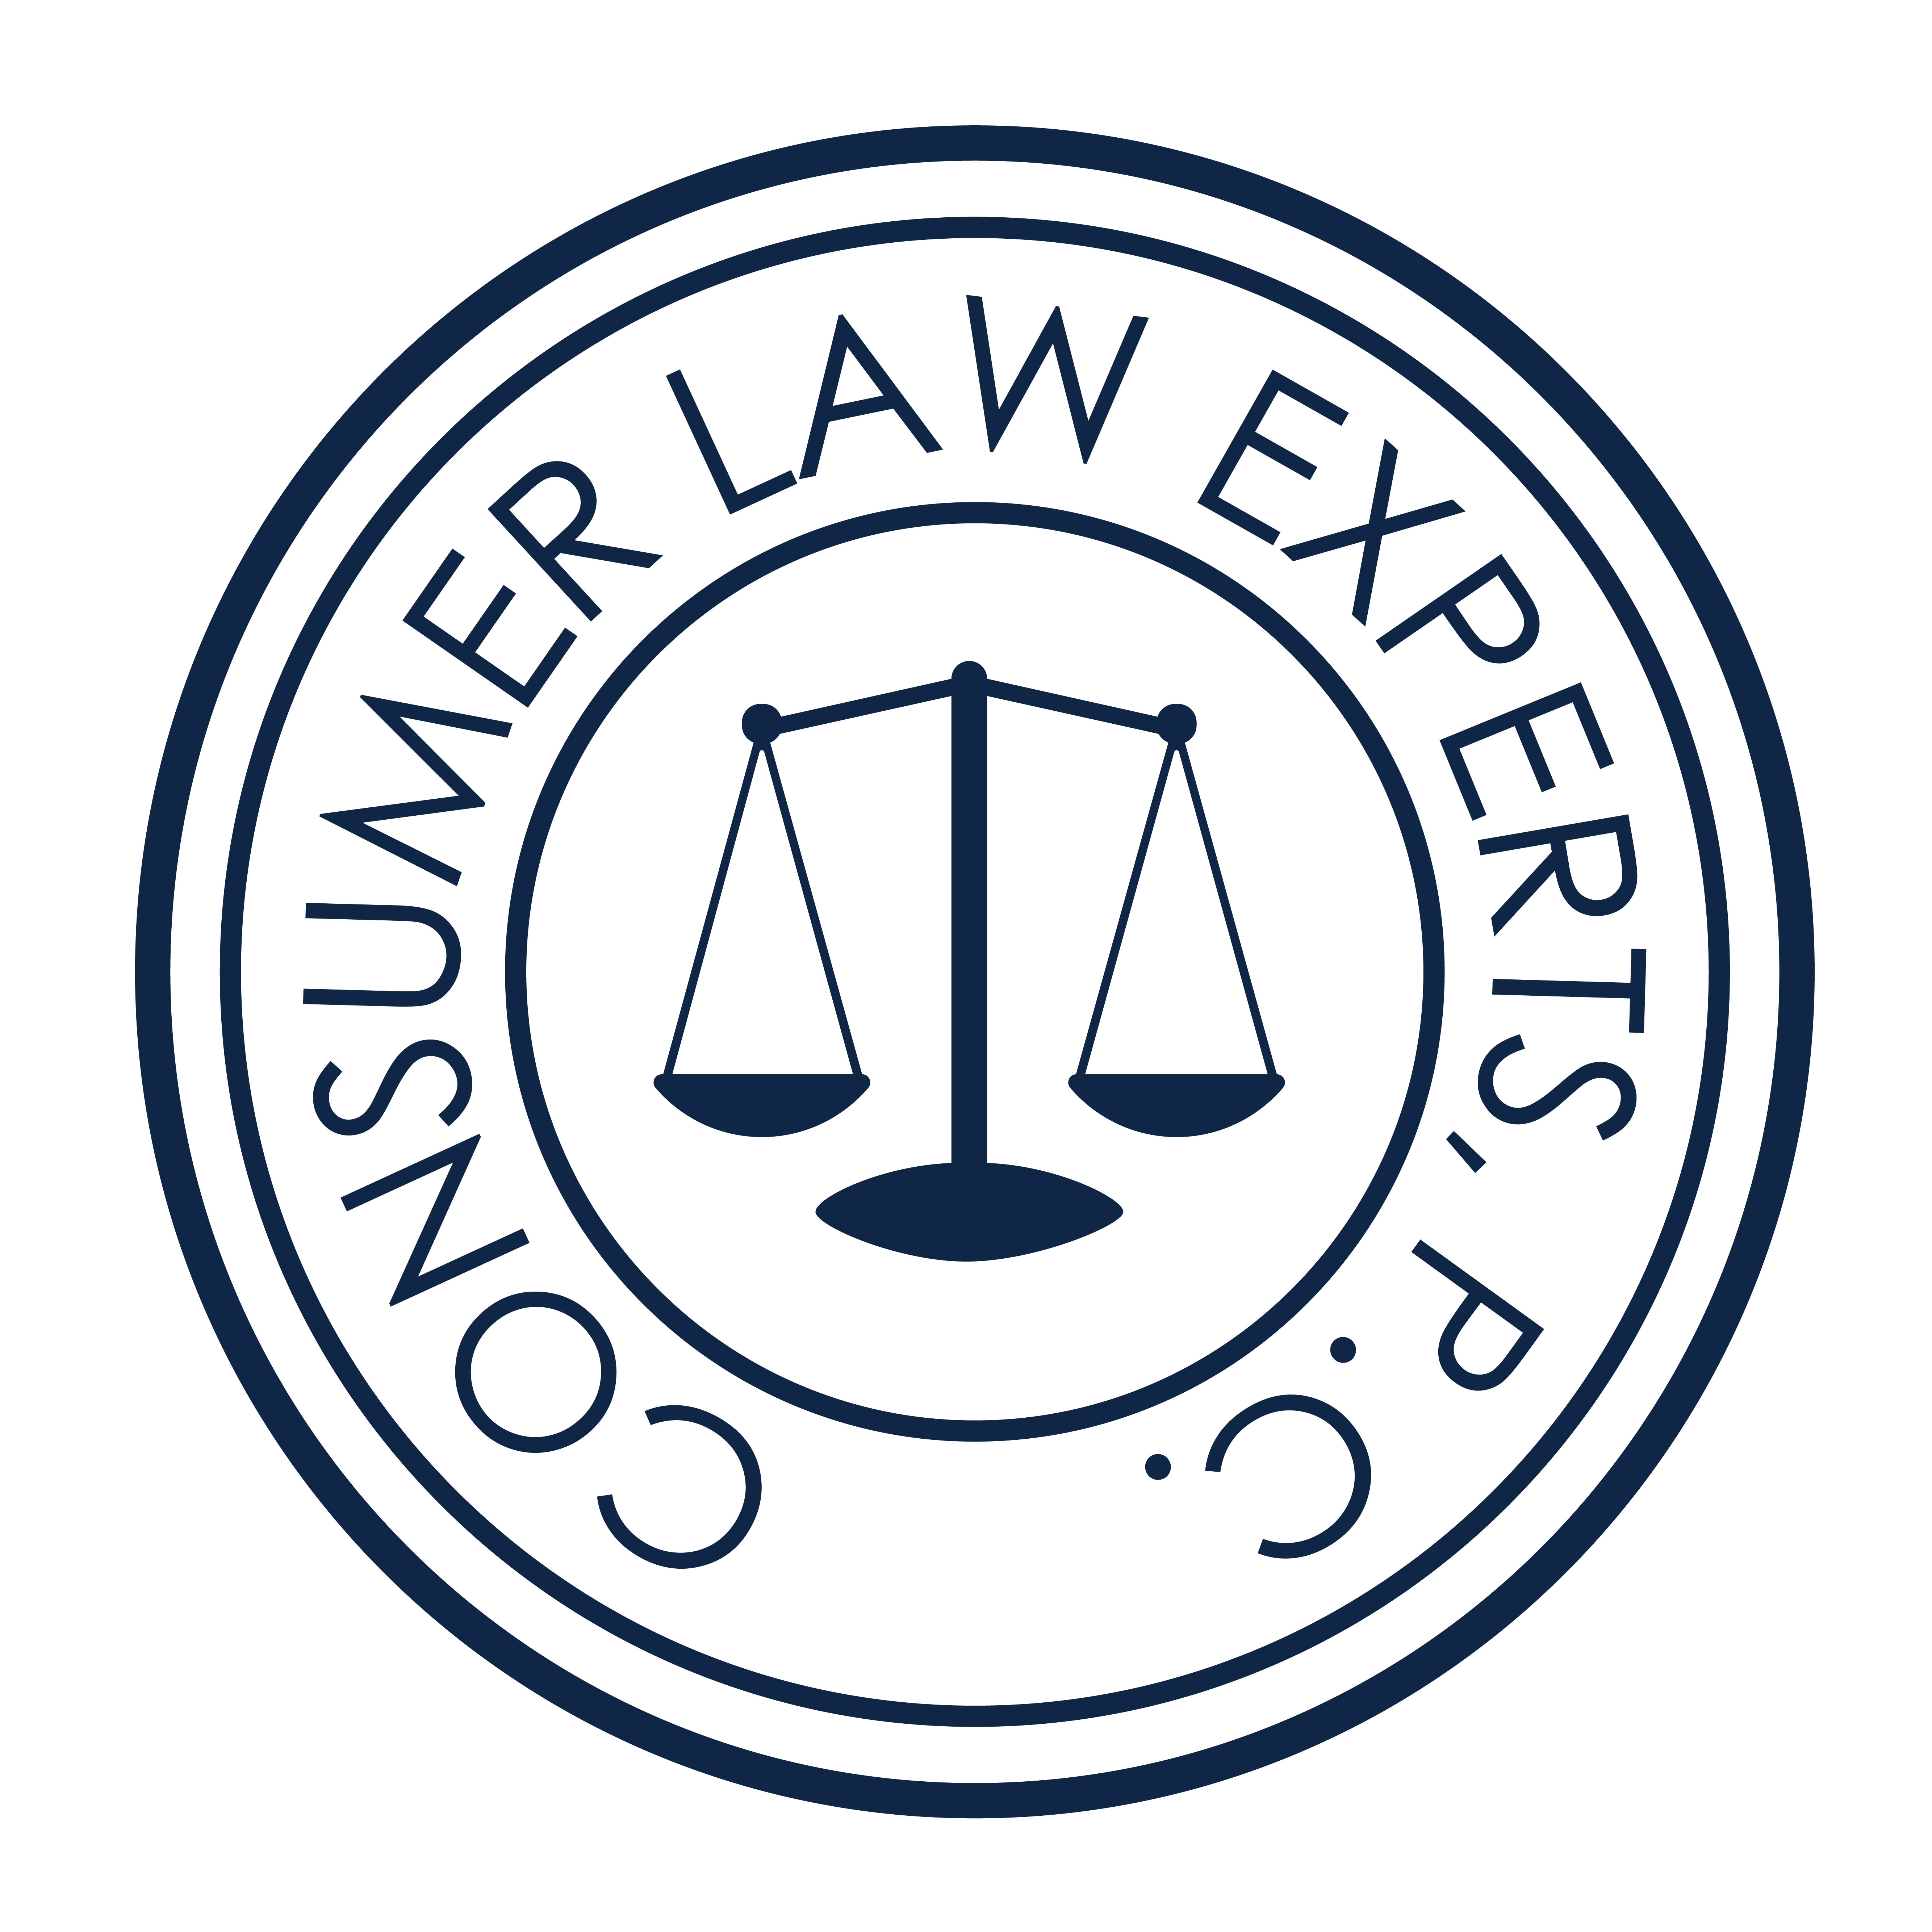 Consumer Law Experts, PC - The Lemon Law Experts - Los Angeles, CA, US, california lemon law attorneys